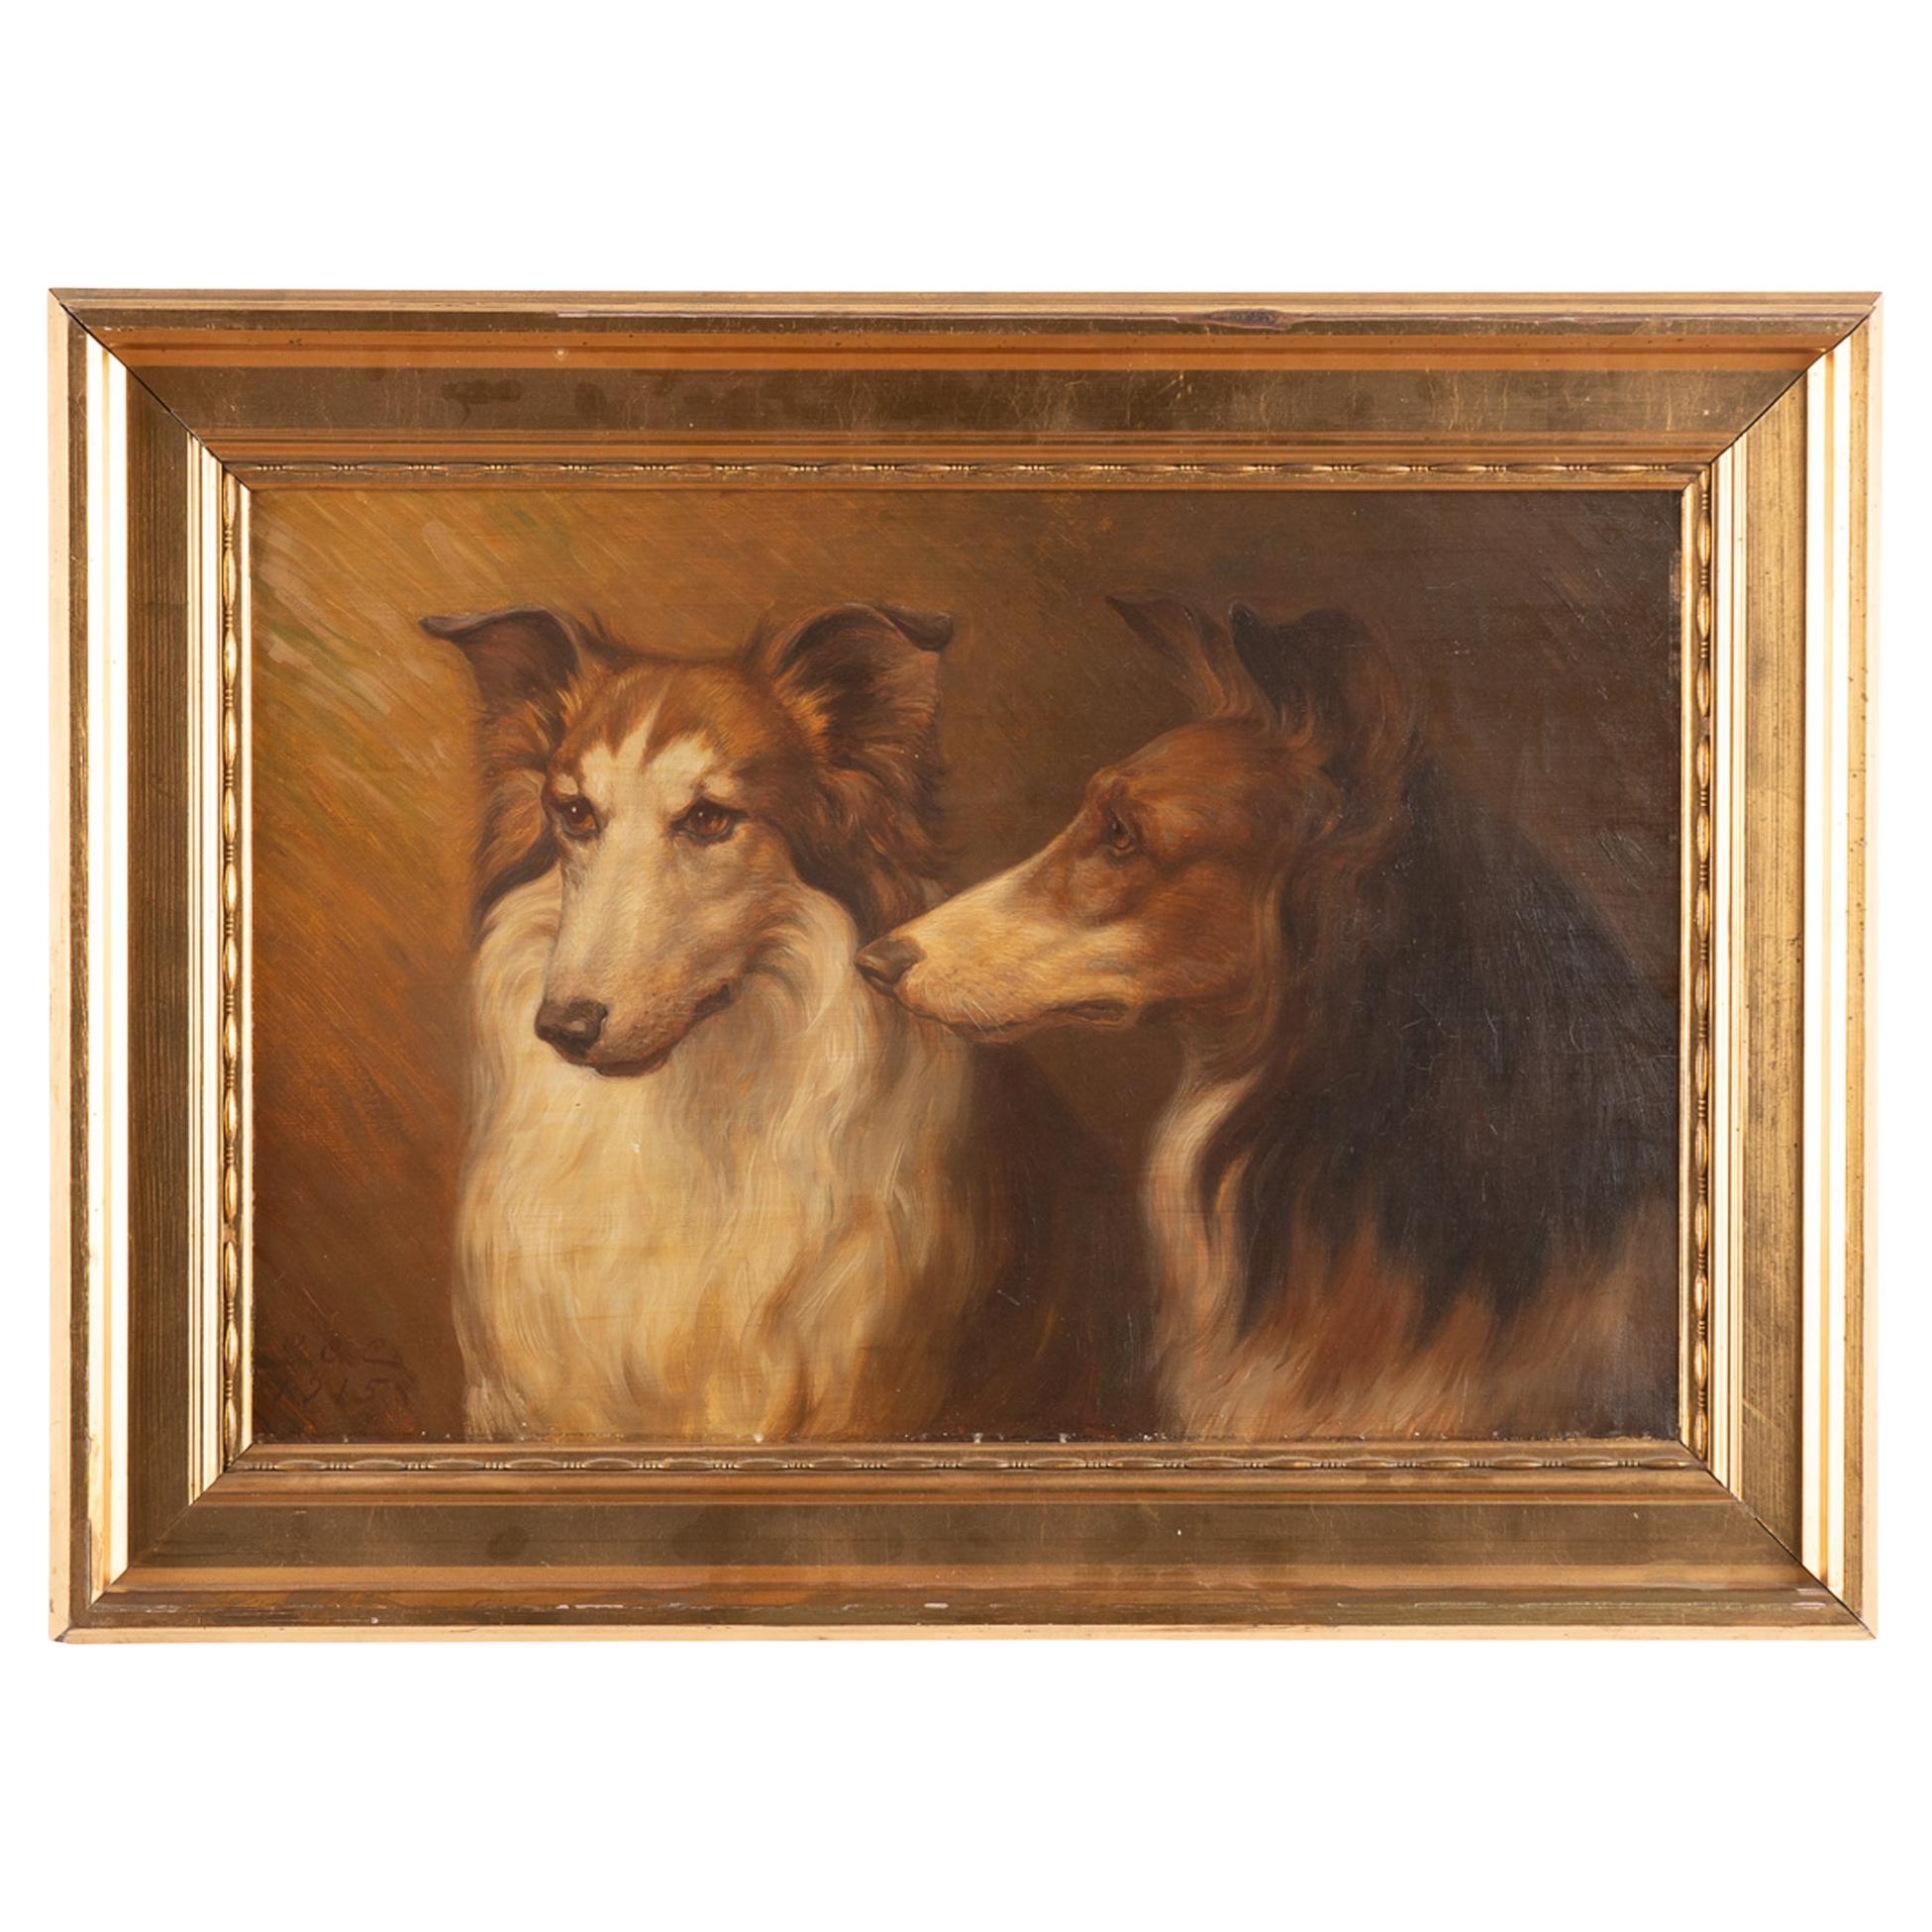 Original Oil on Canvas Painting of Two Collies by G.A. Clemens Signed Dated 1915